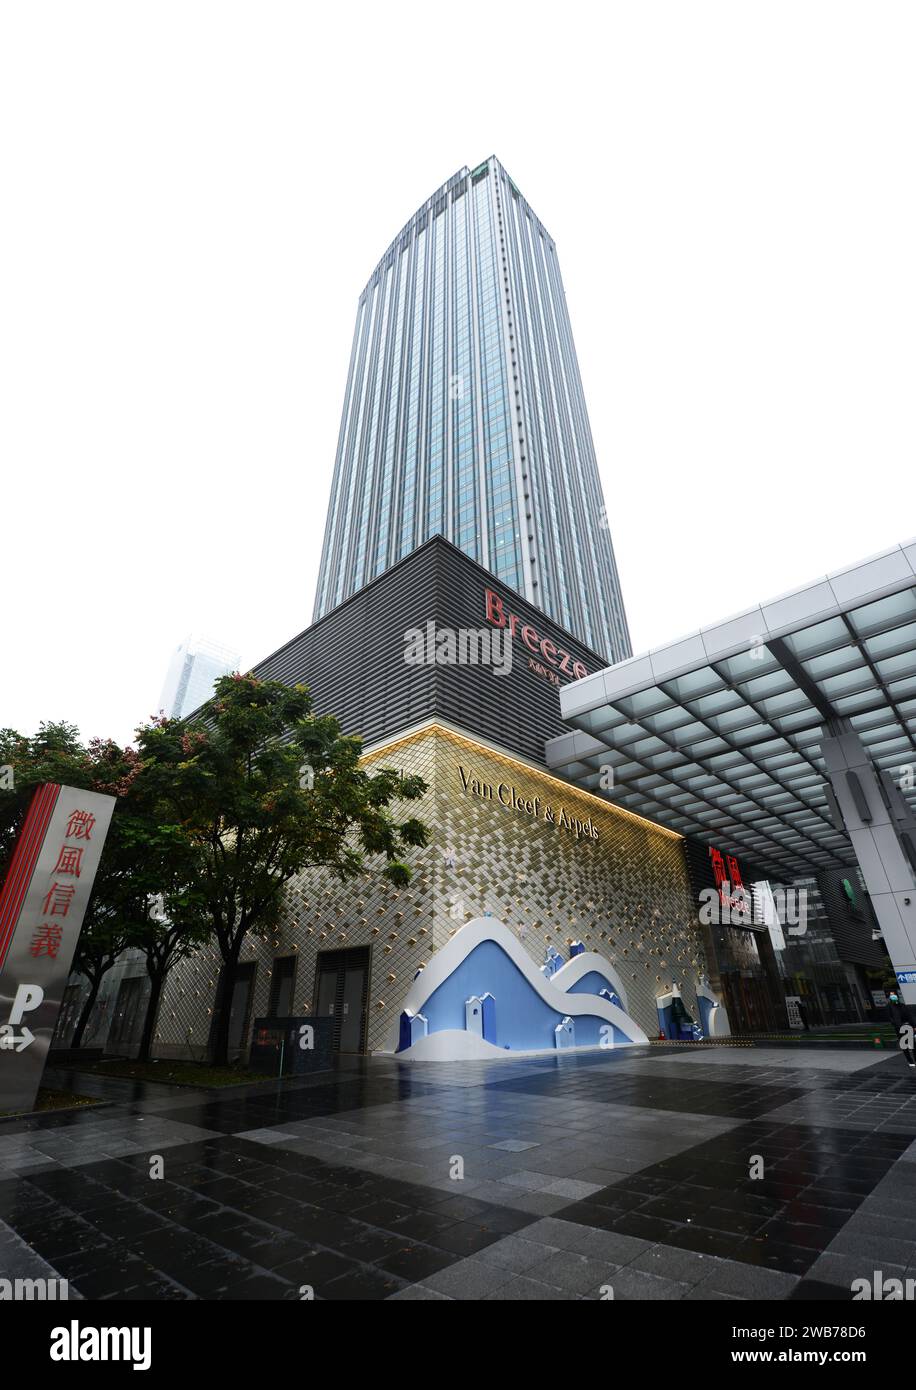 The Breeze Shopping mall with the Cathay Landmark tower in Xinyi, Taipei, Taiwan. Stock Photo